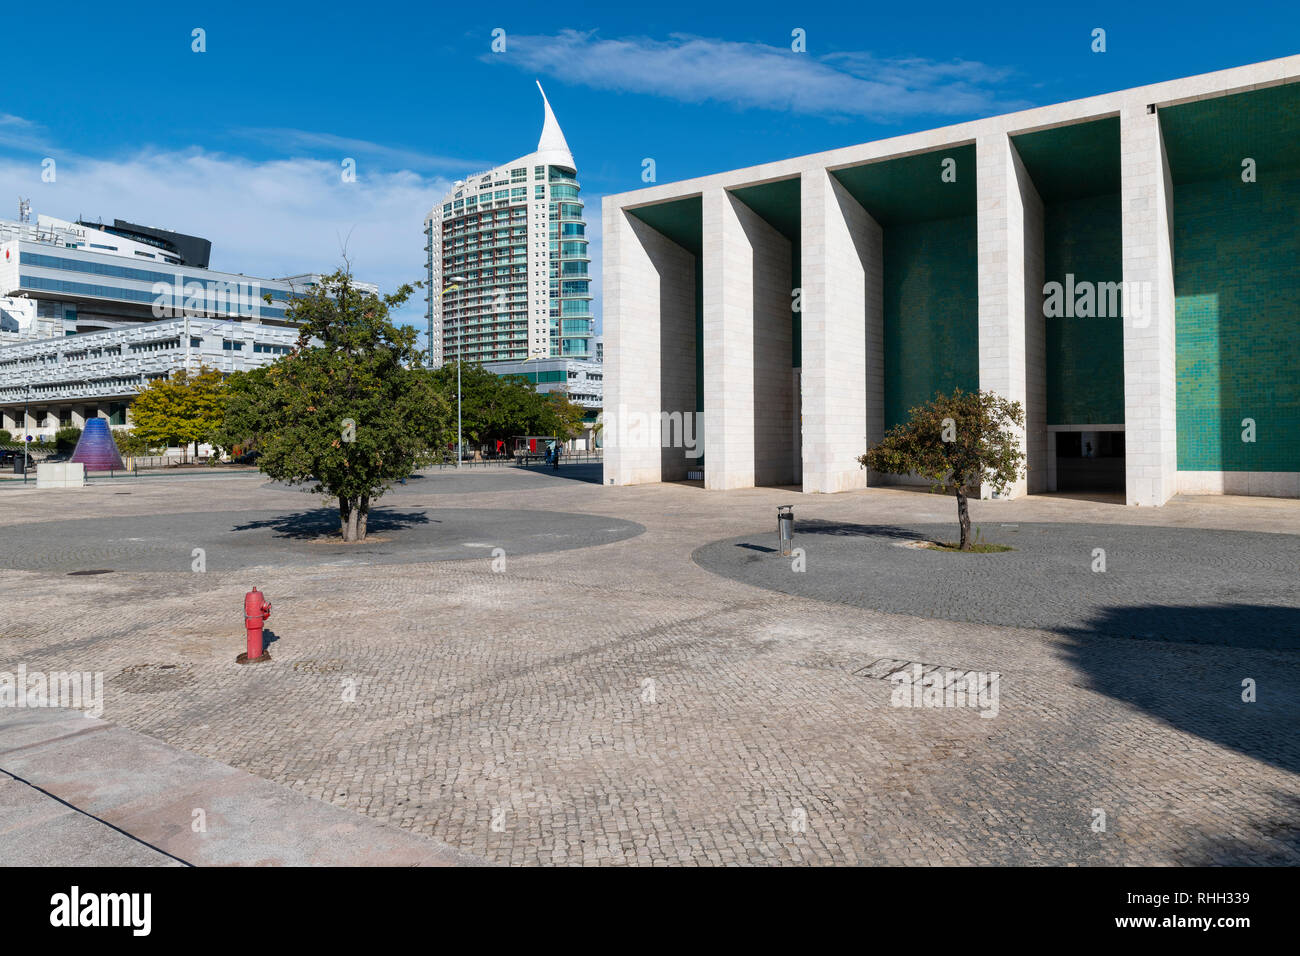 Lisbon, Portugal - October 20, 2018: View of the Portugal Pavillion (Pavilhao de Portugal) at the Park of Nations in the city of Lisbon, in Portugal. Stock Photo